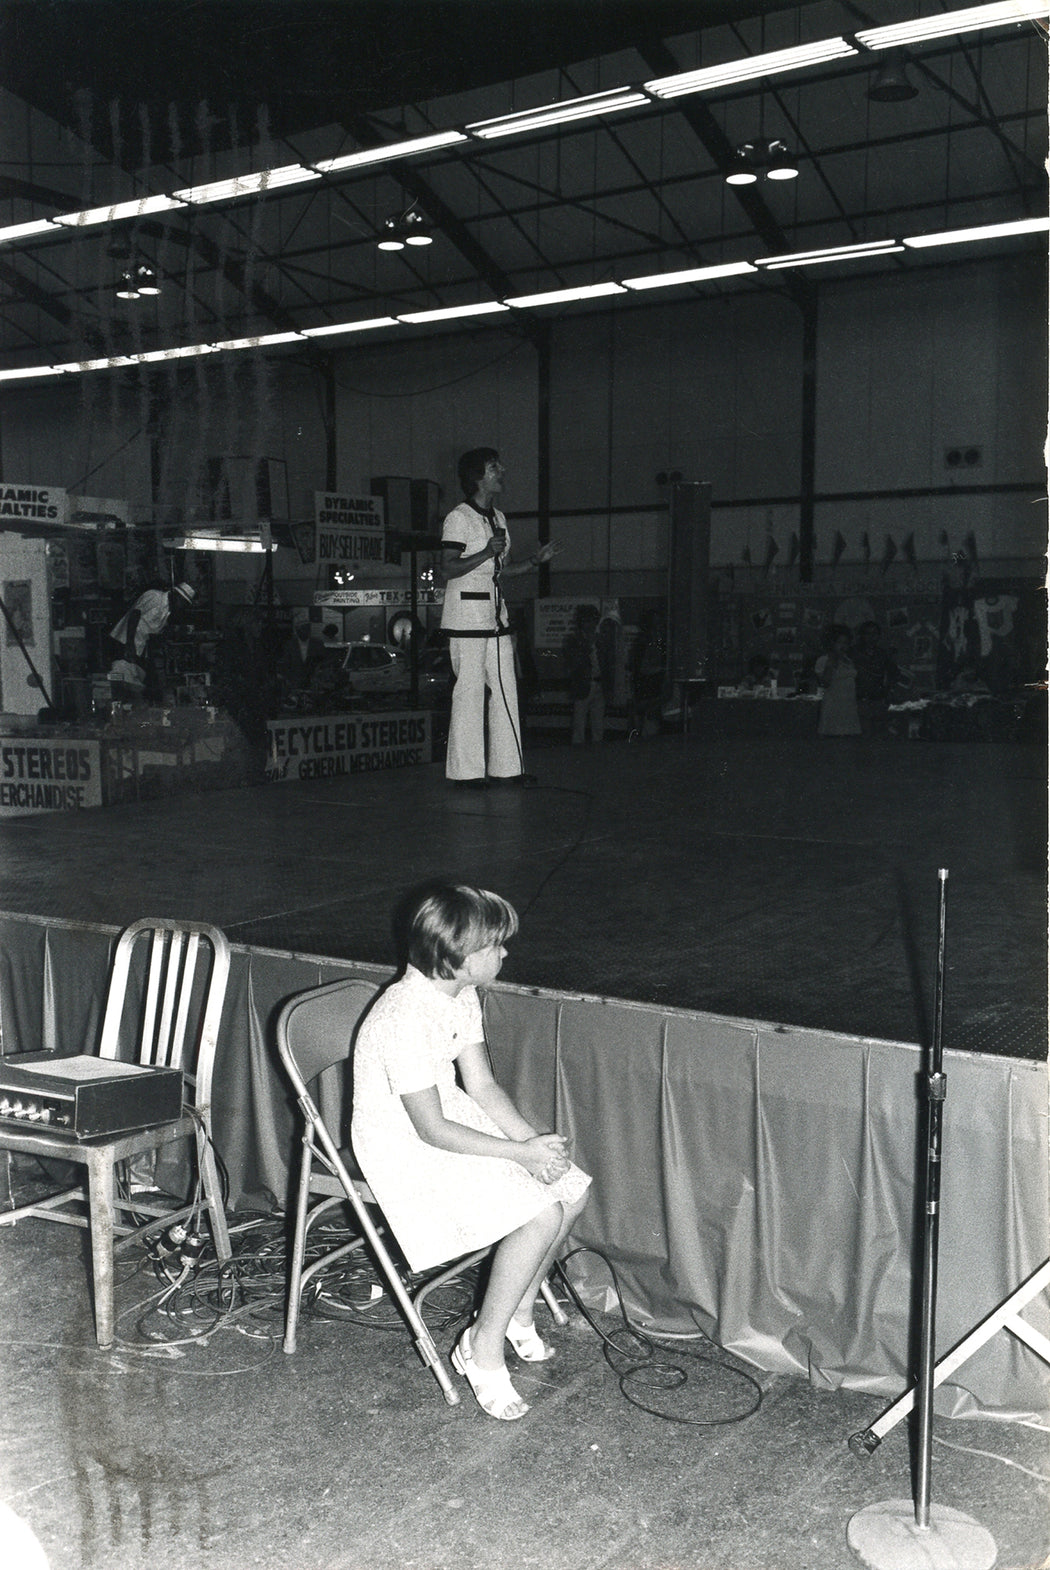 Untitled, San Mateo, California [girl sitting alone by stage]